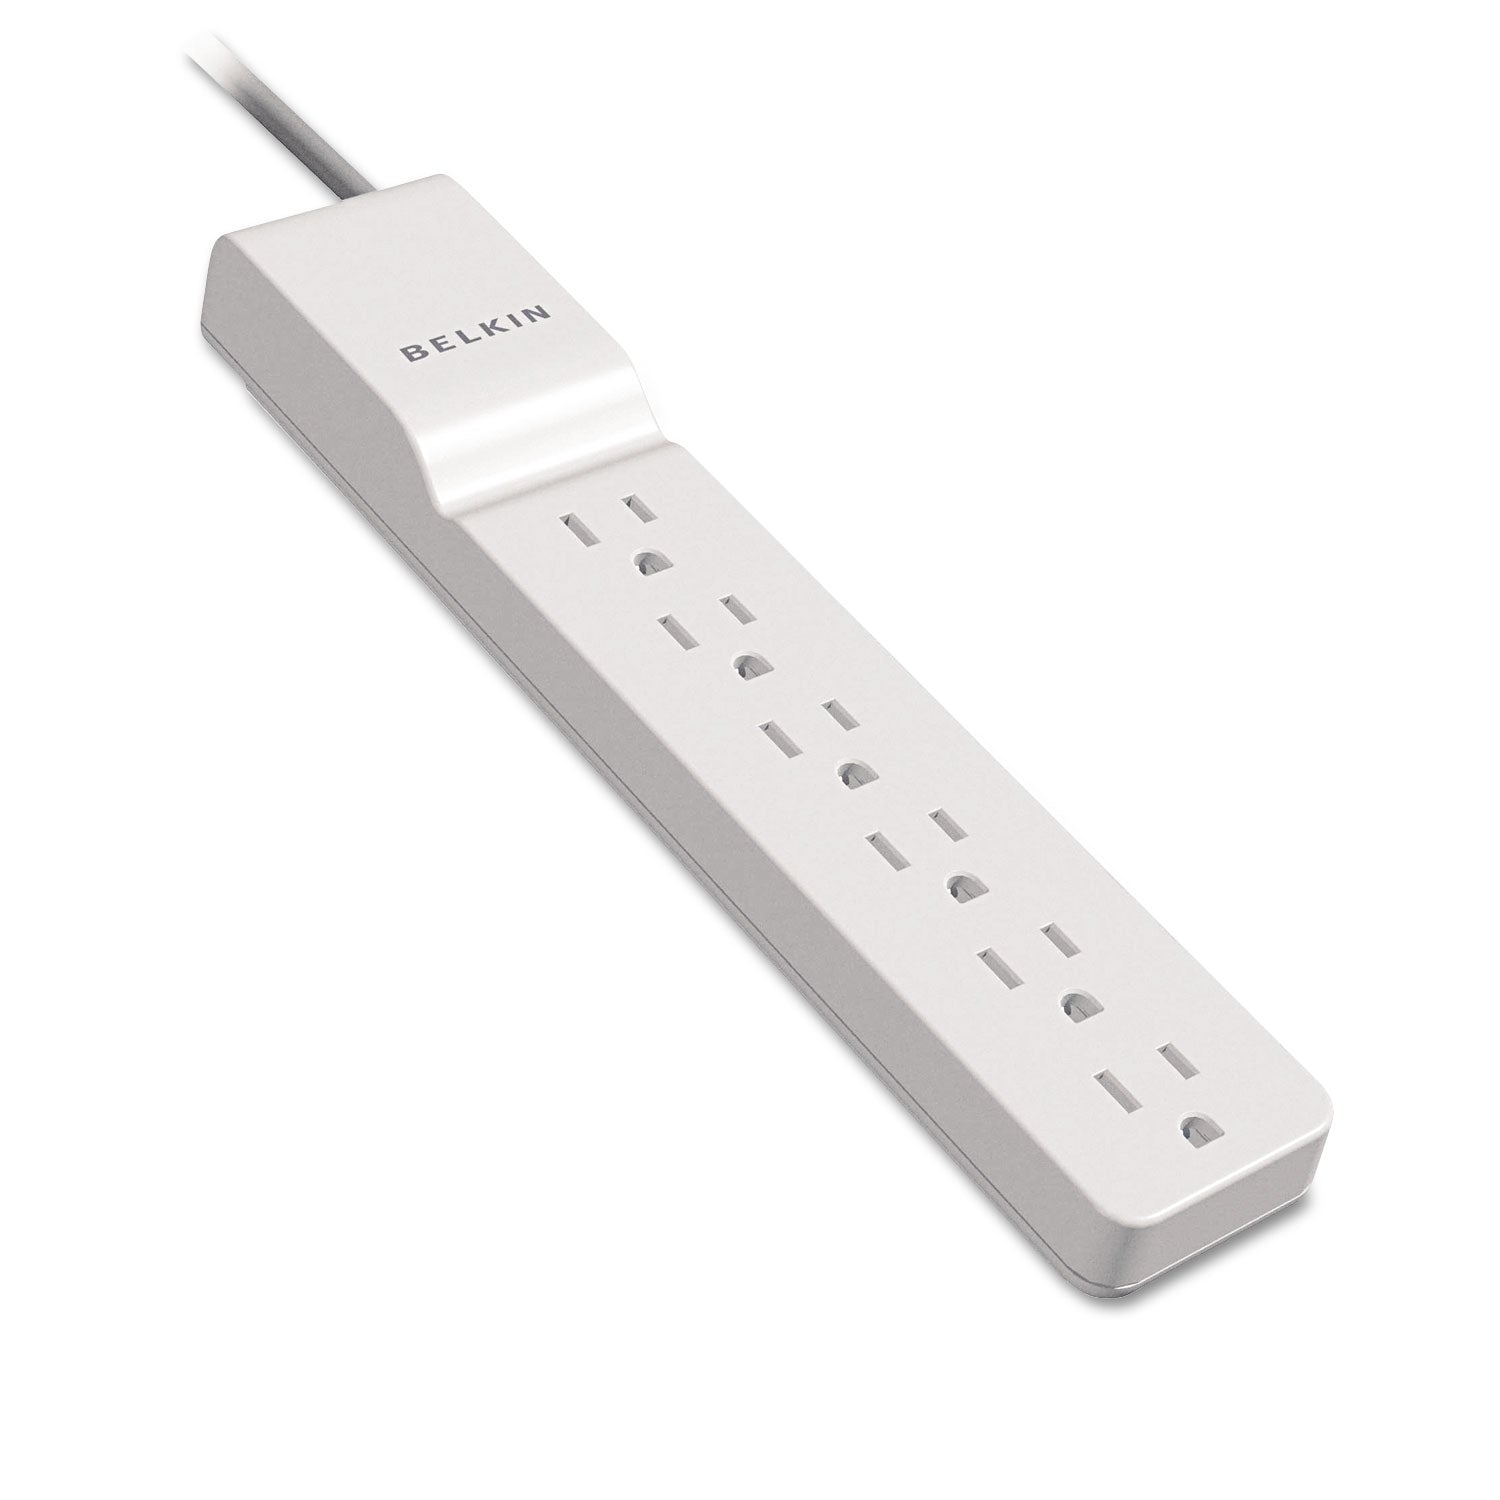 Home/Office Surge Protector, 6 AC Outlets, 4 ft Cord, 720 J, White - 